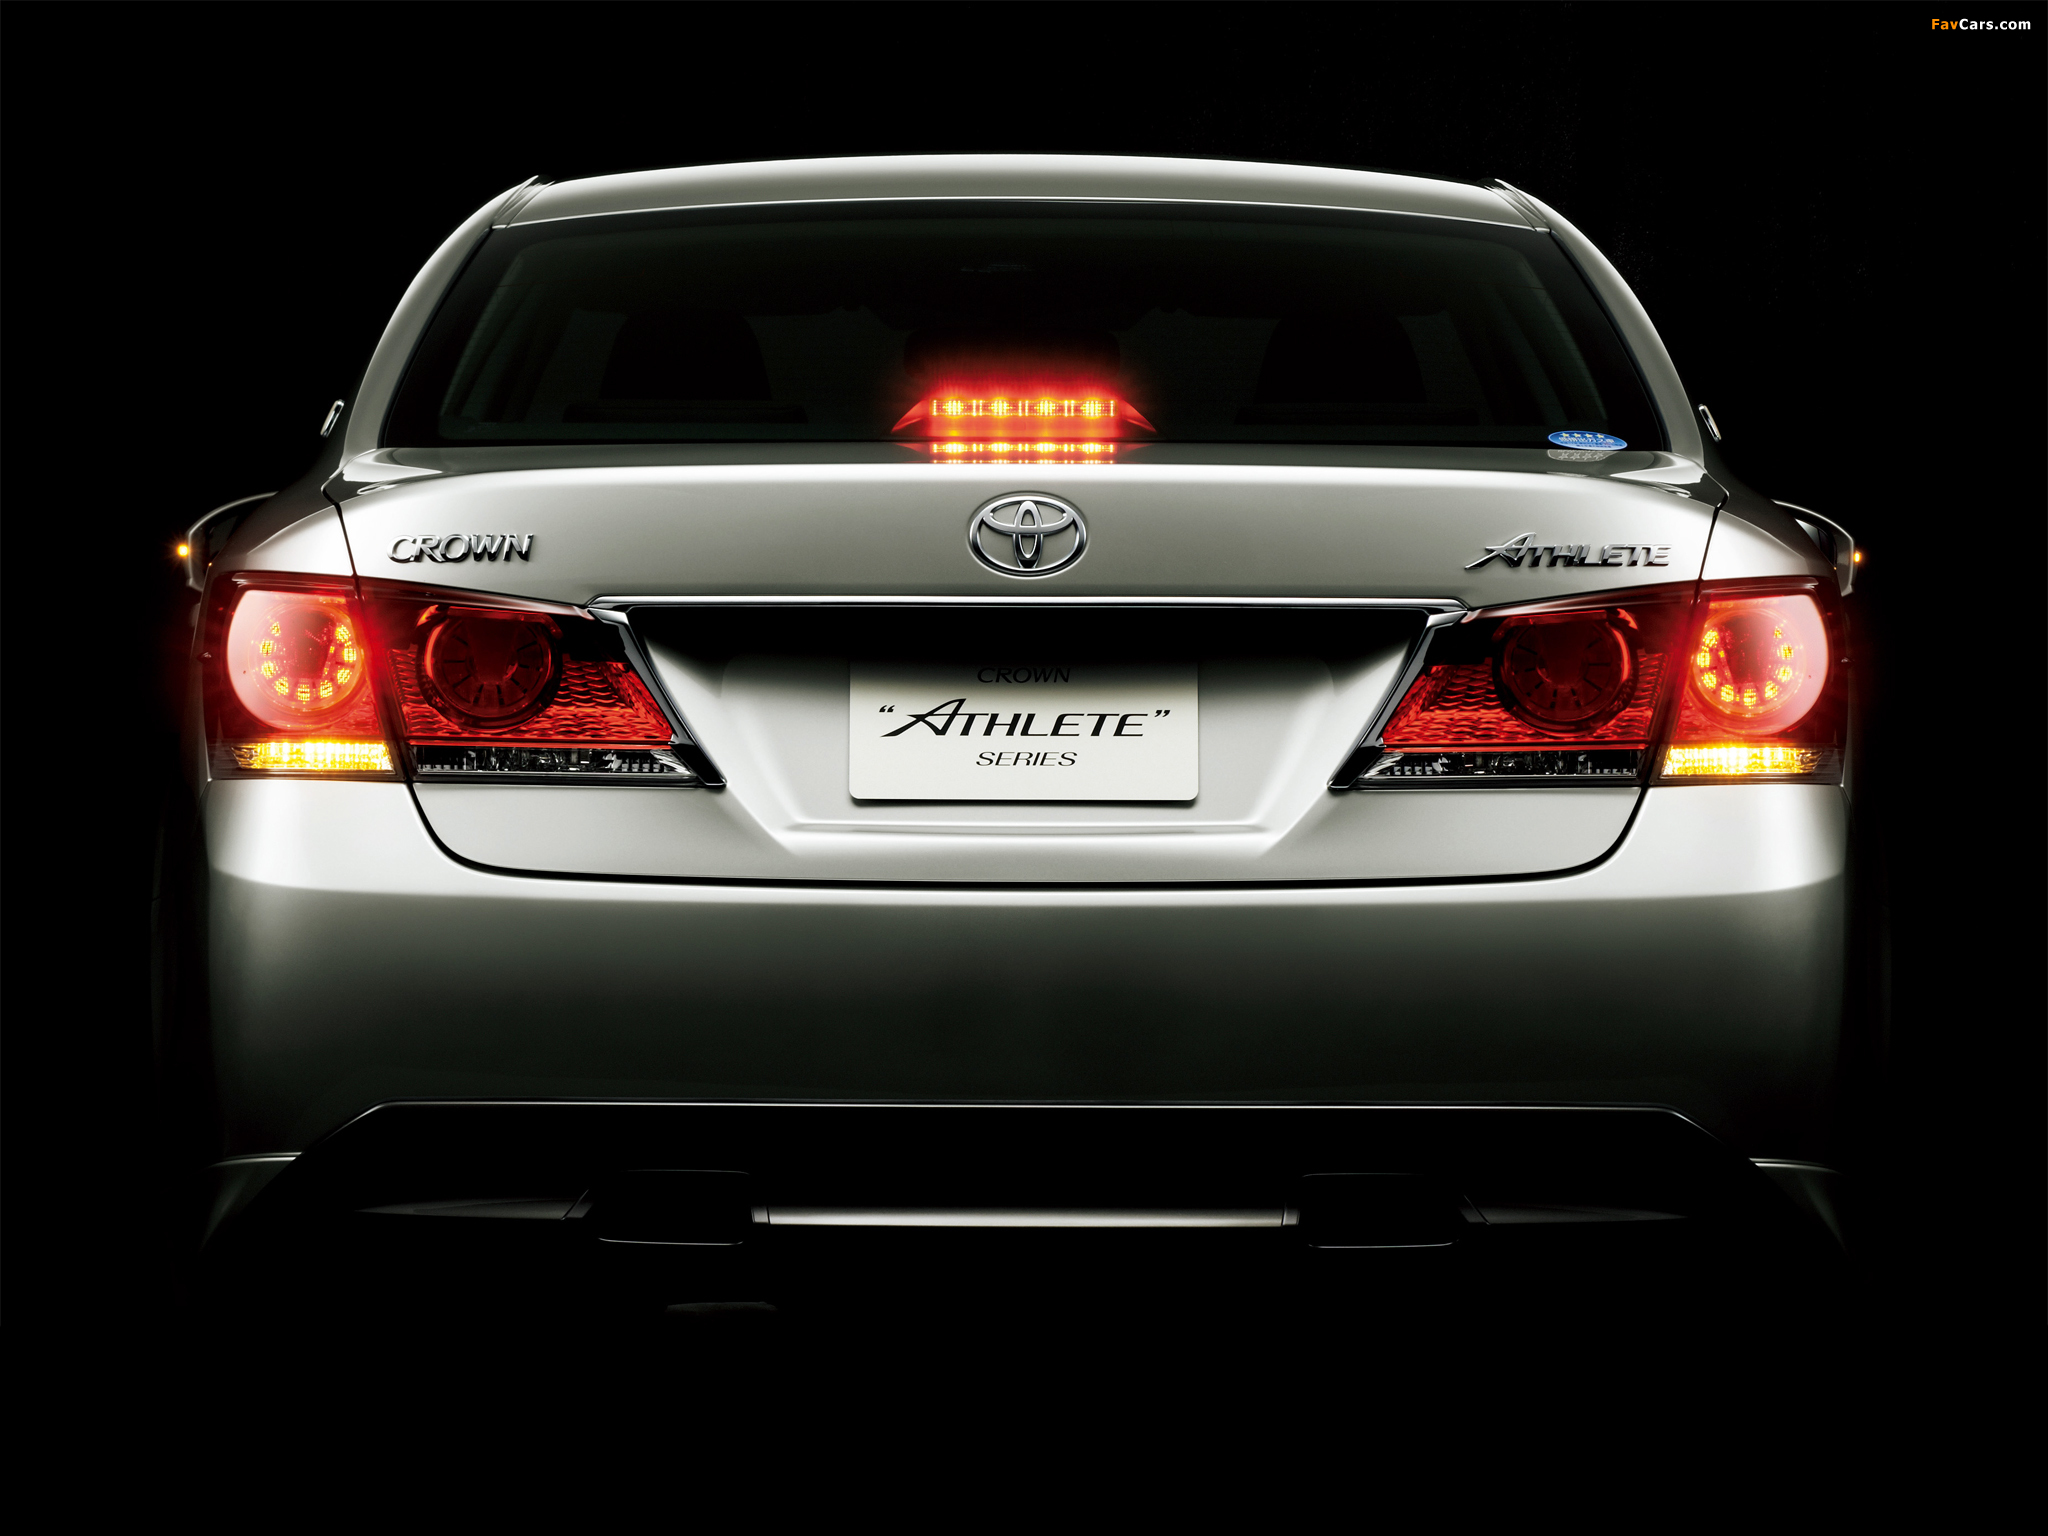 Toyota Crown Athlete (S210) 2012 images (2048 x 1536)